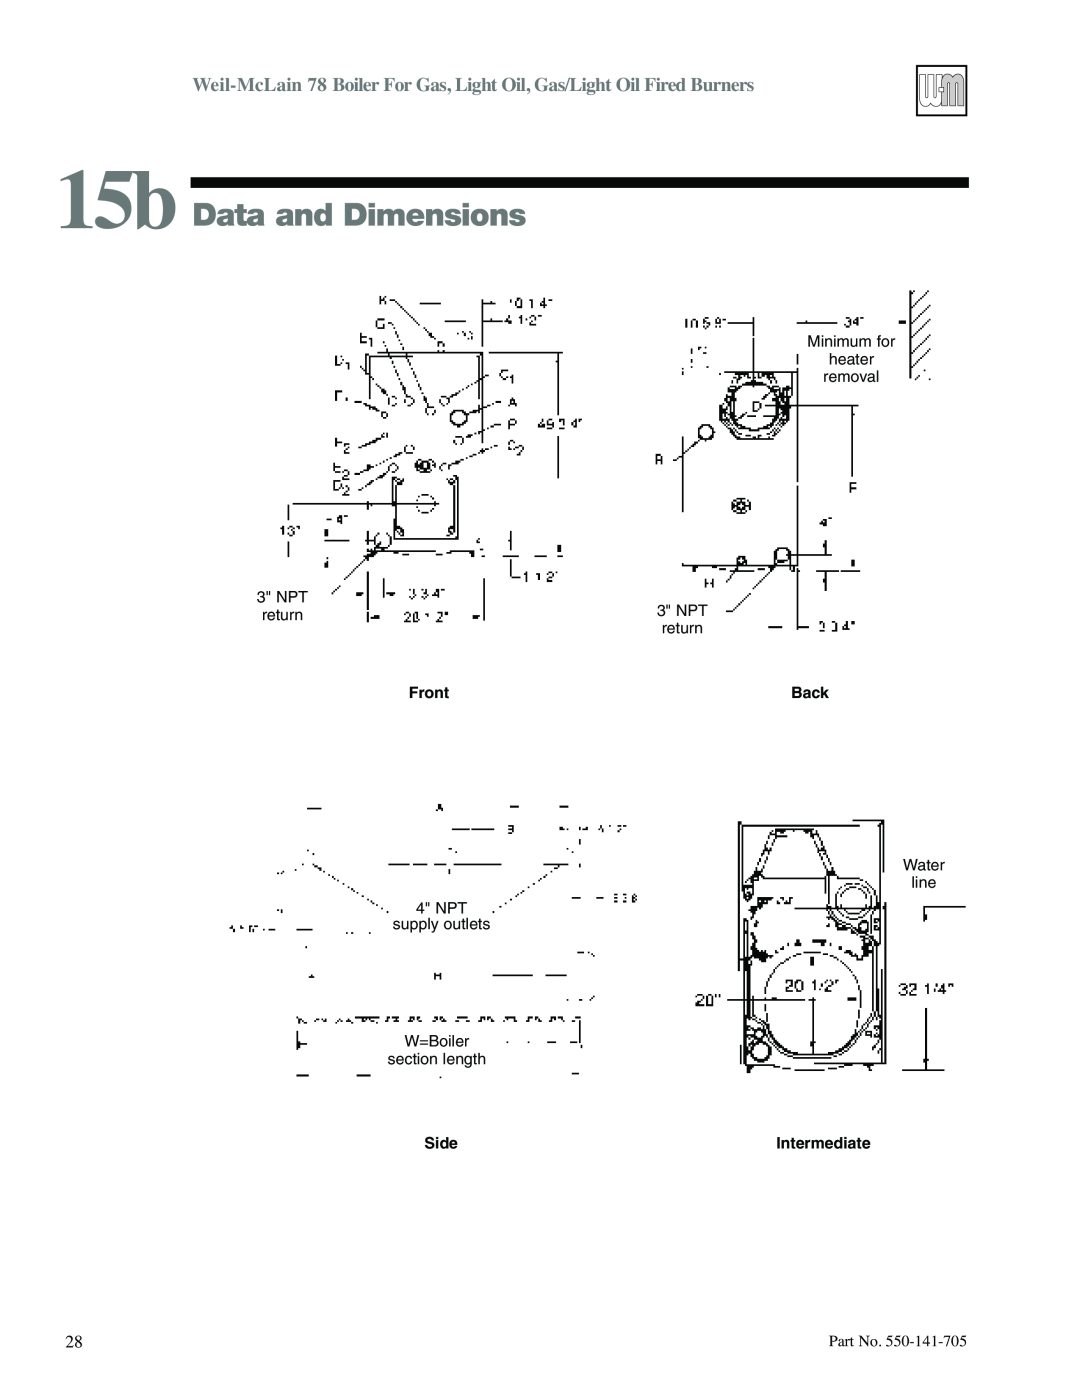 Weil-McLain 78 manual 15b Data and Dimensions, Front, Side, Intermediate, Back 